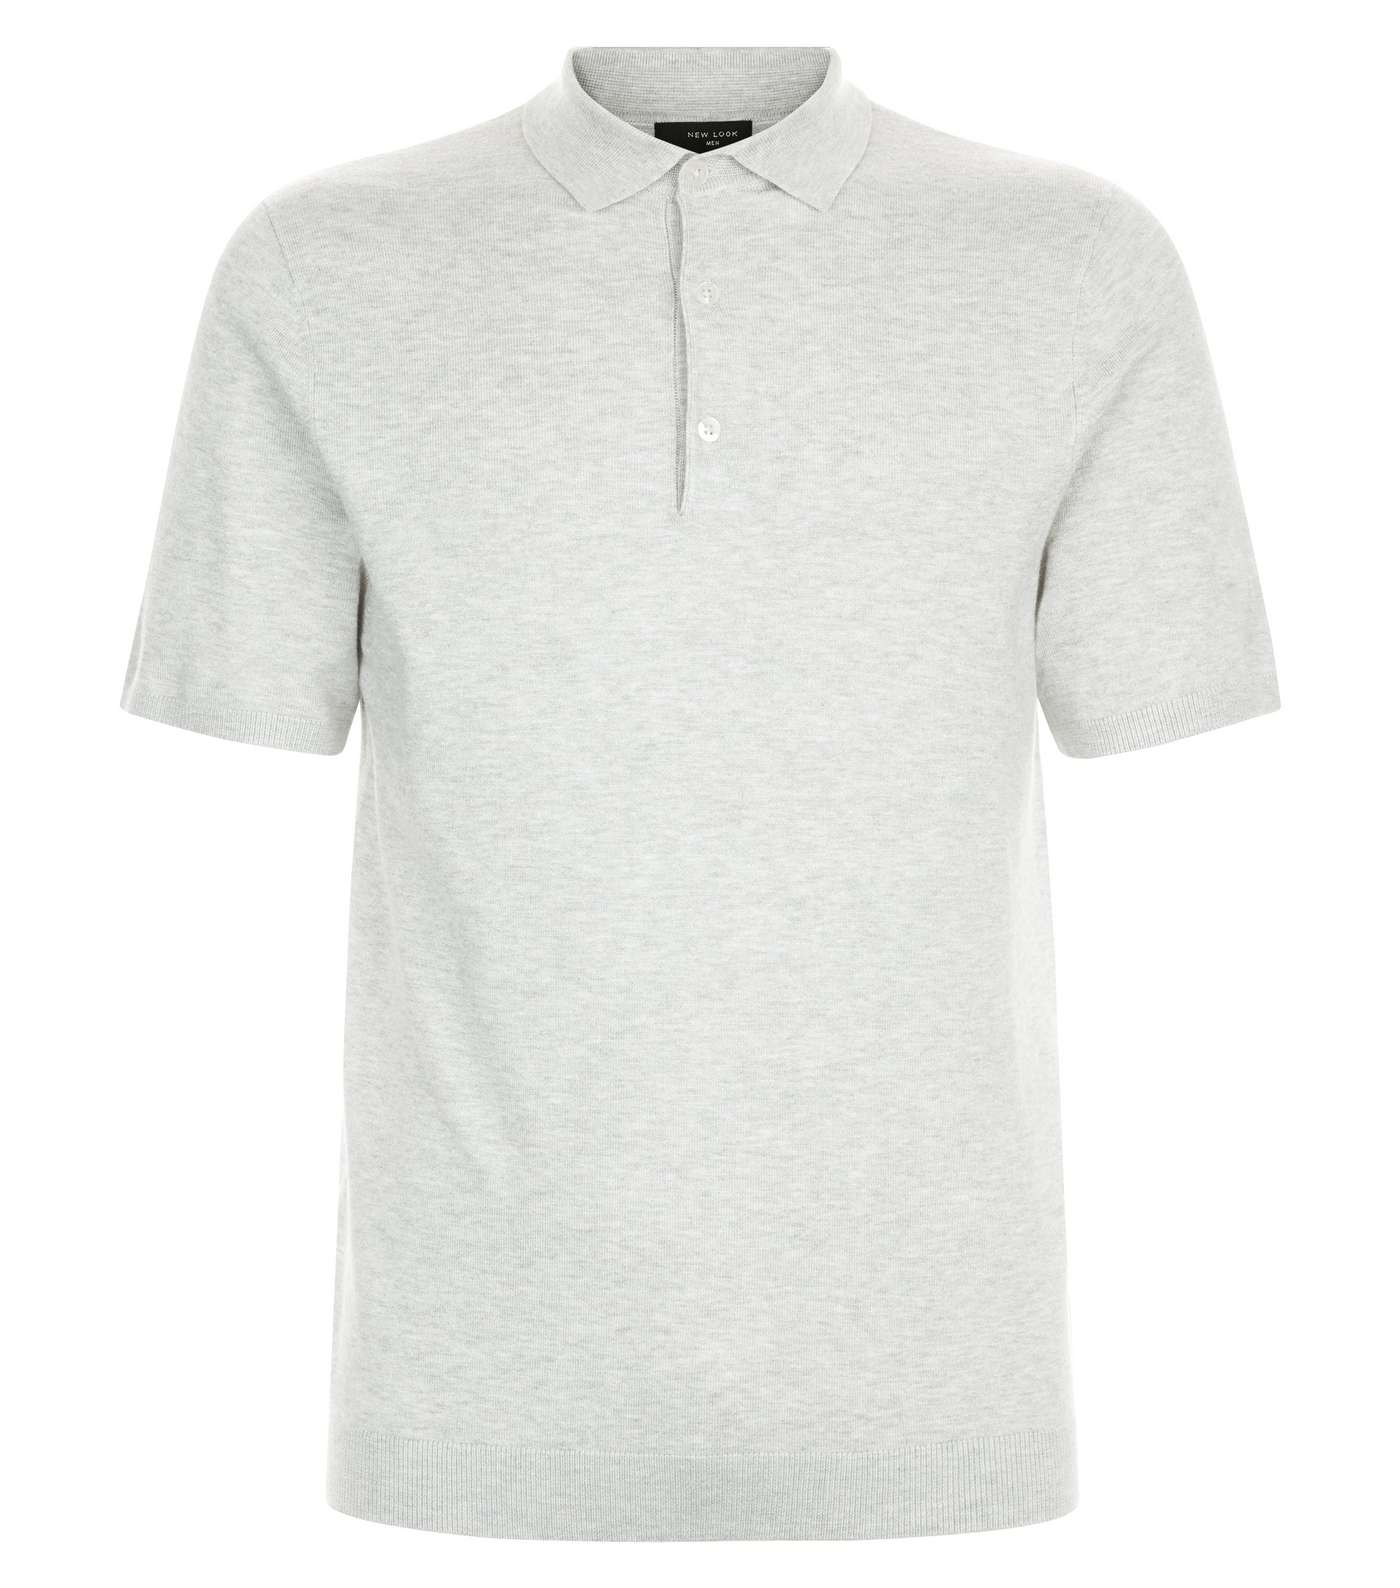 Grey Knit Muscle Fit Polo Shirt Image 4